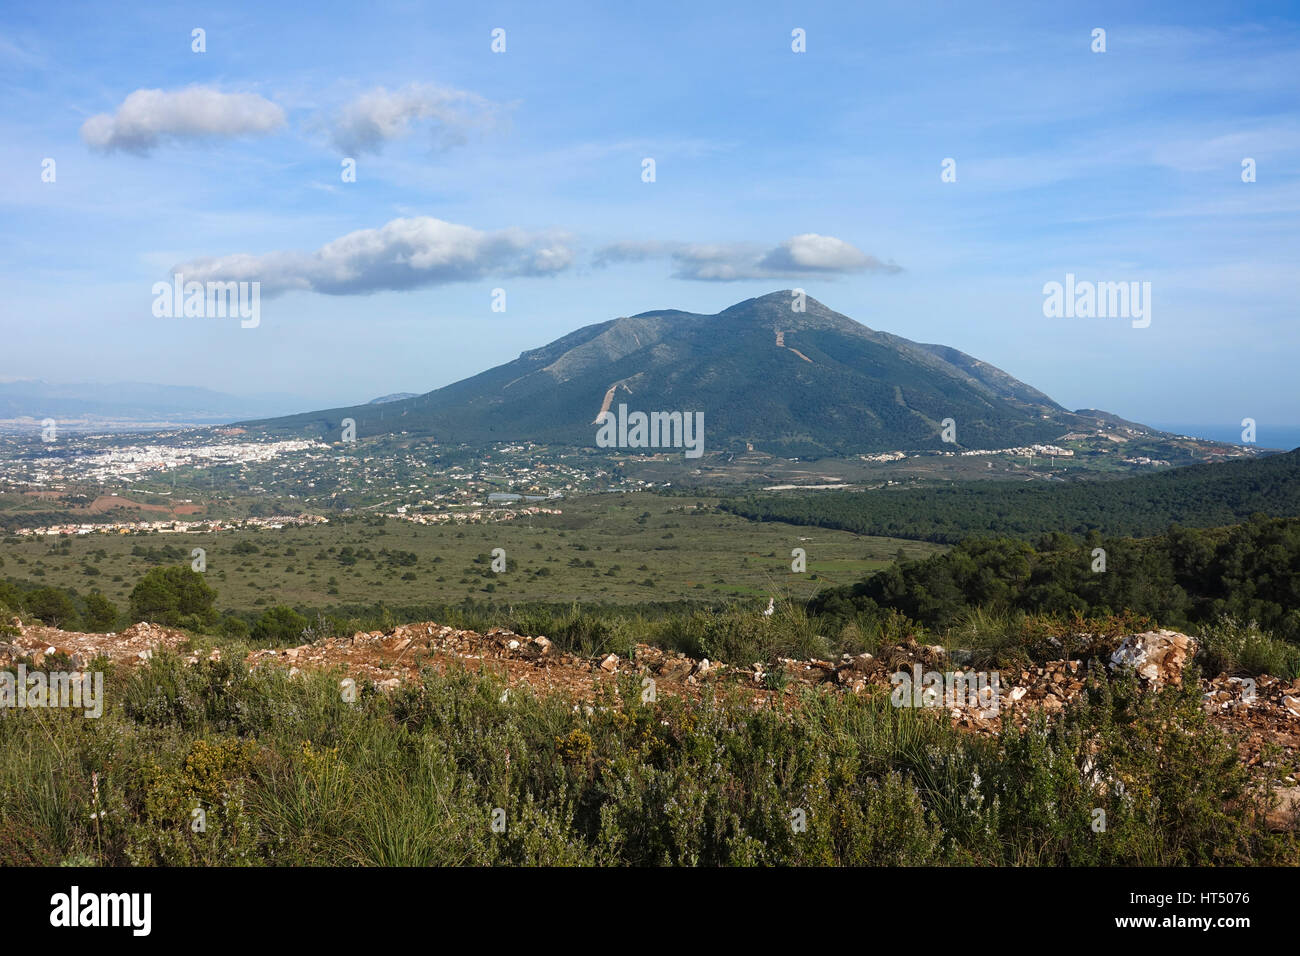 Maquis scrubland with Sierra de Mijas, and white village Alhaurin el grande, Andalusia, Spain. Stock Photo